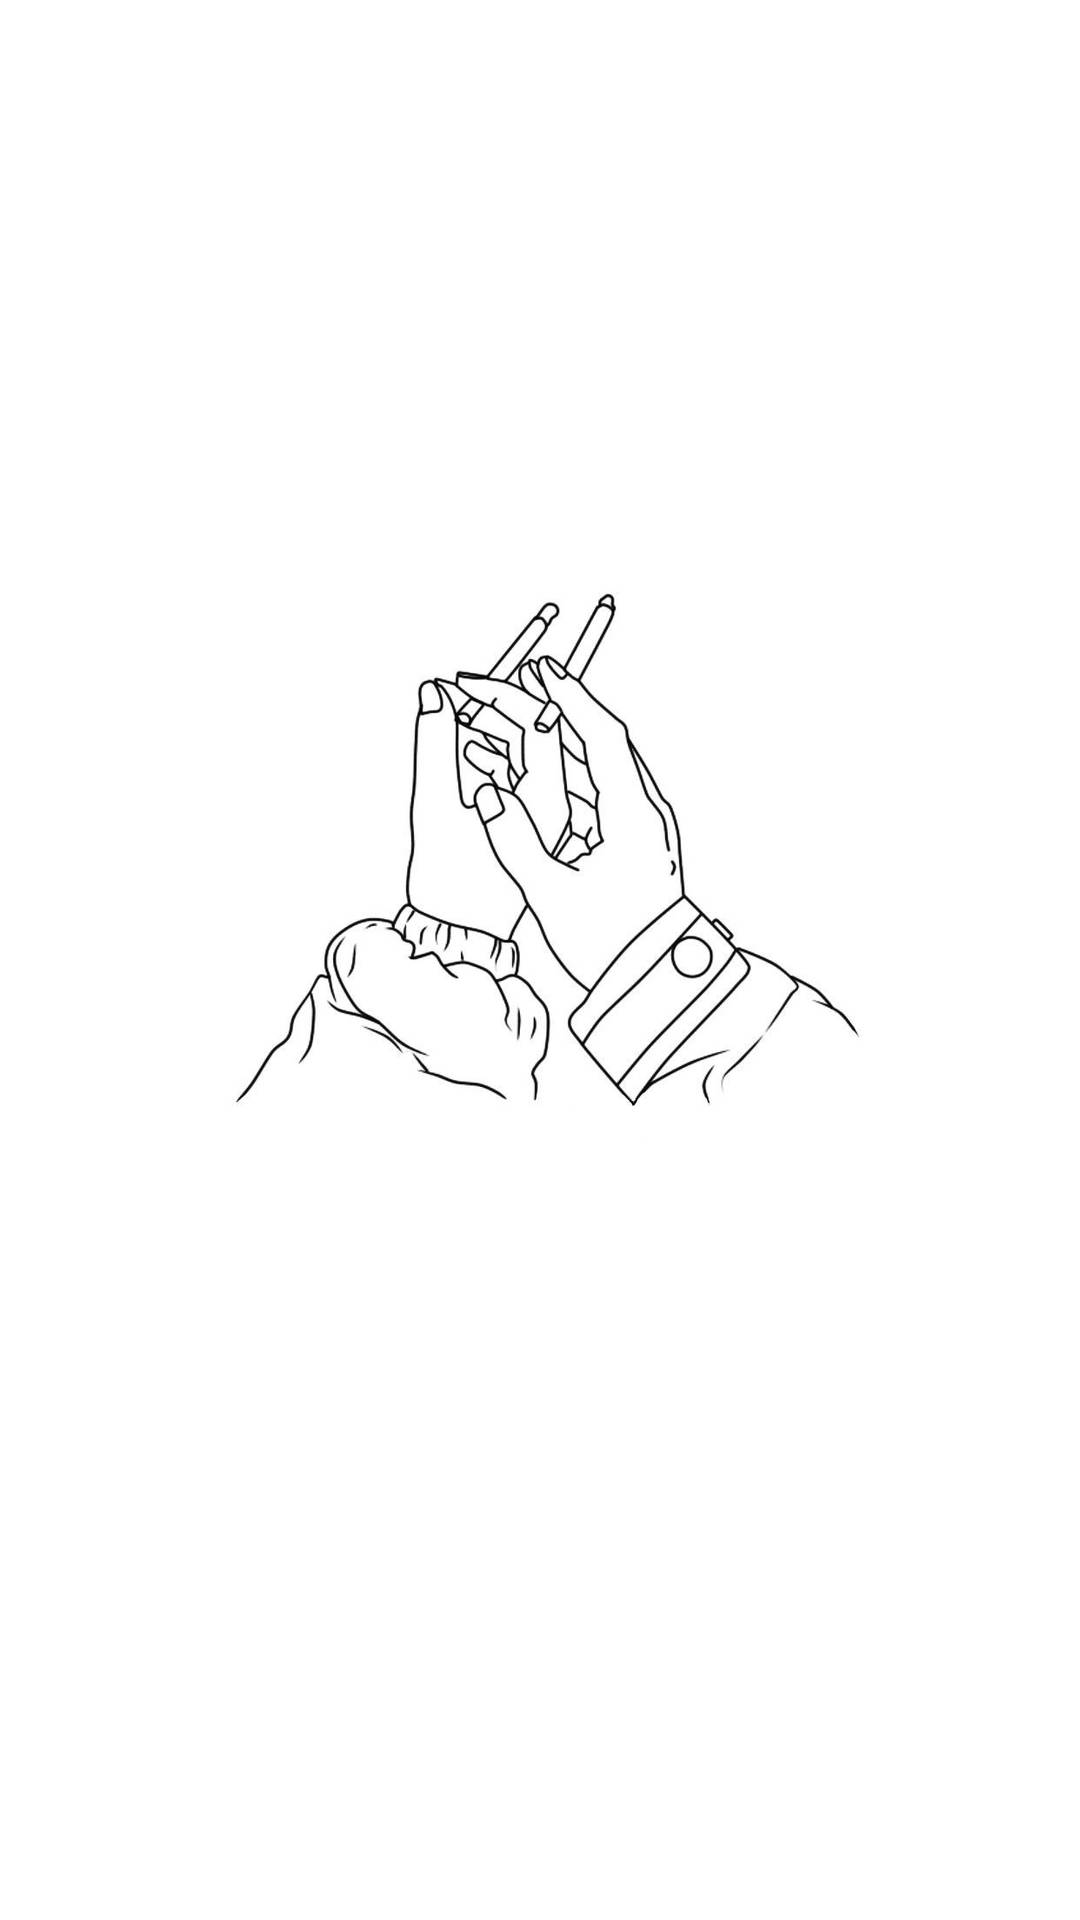 Aesthetic Drawing Of Hands With Cigarettes Background